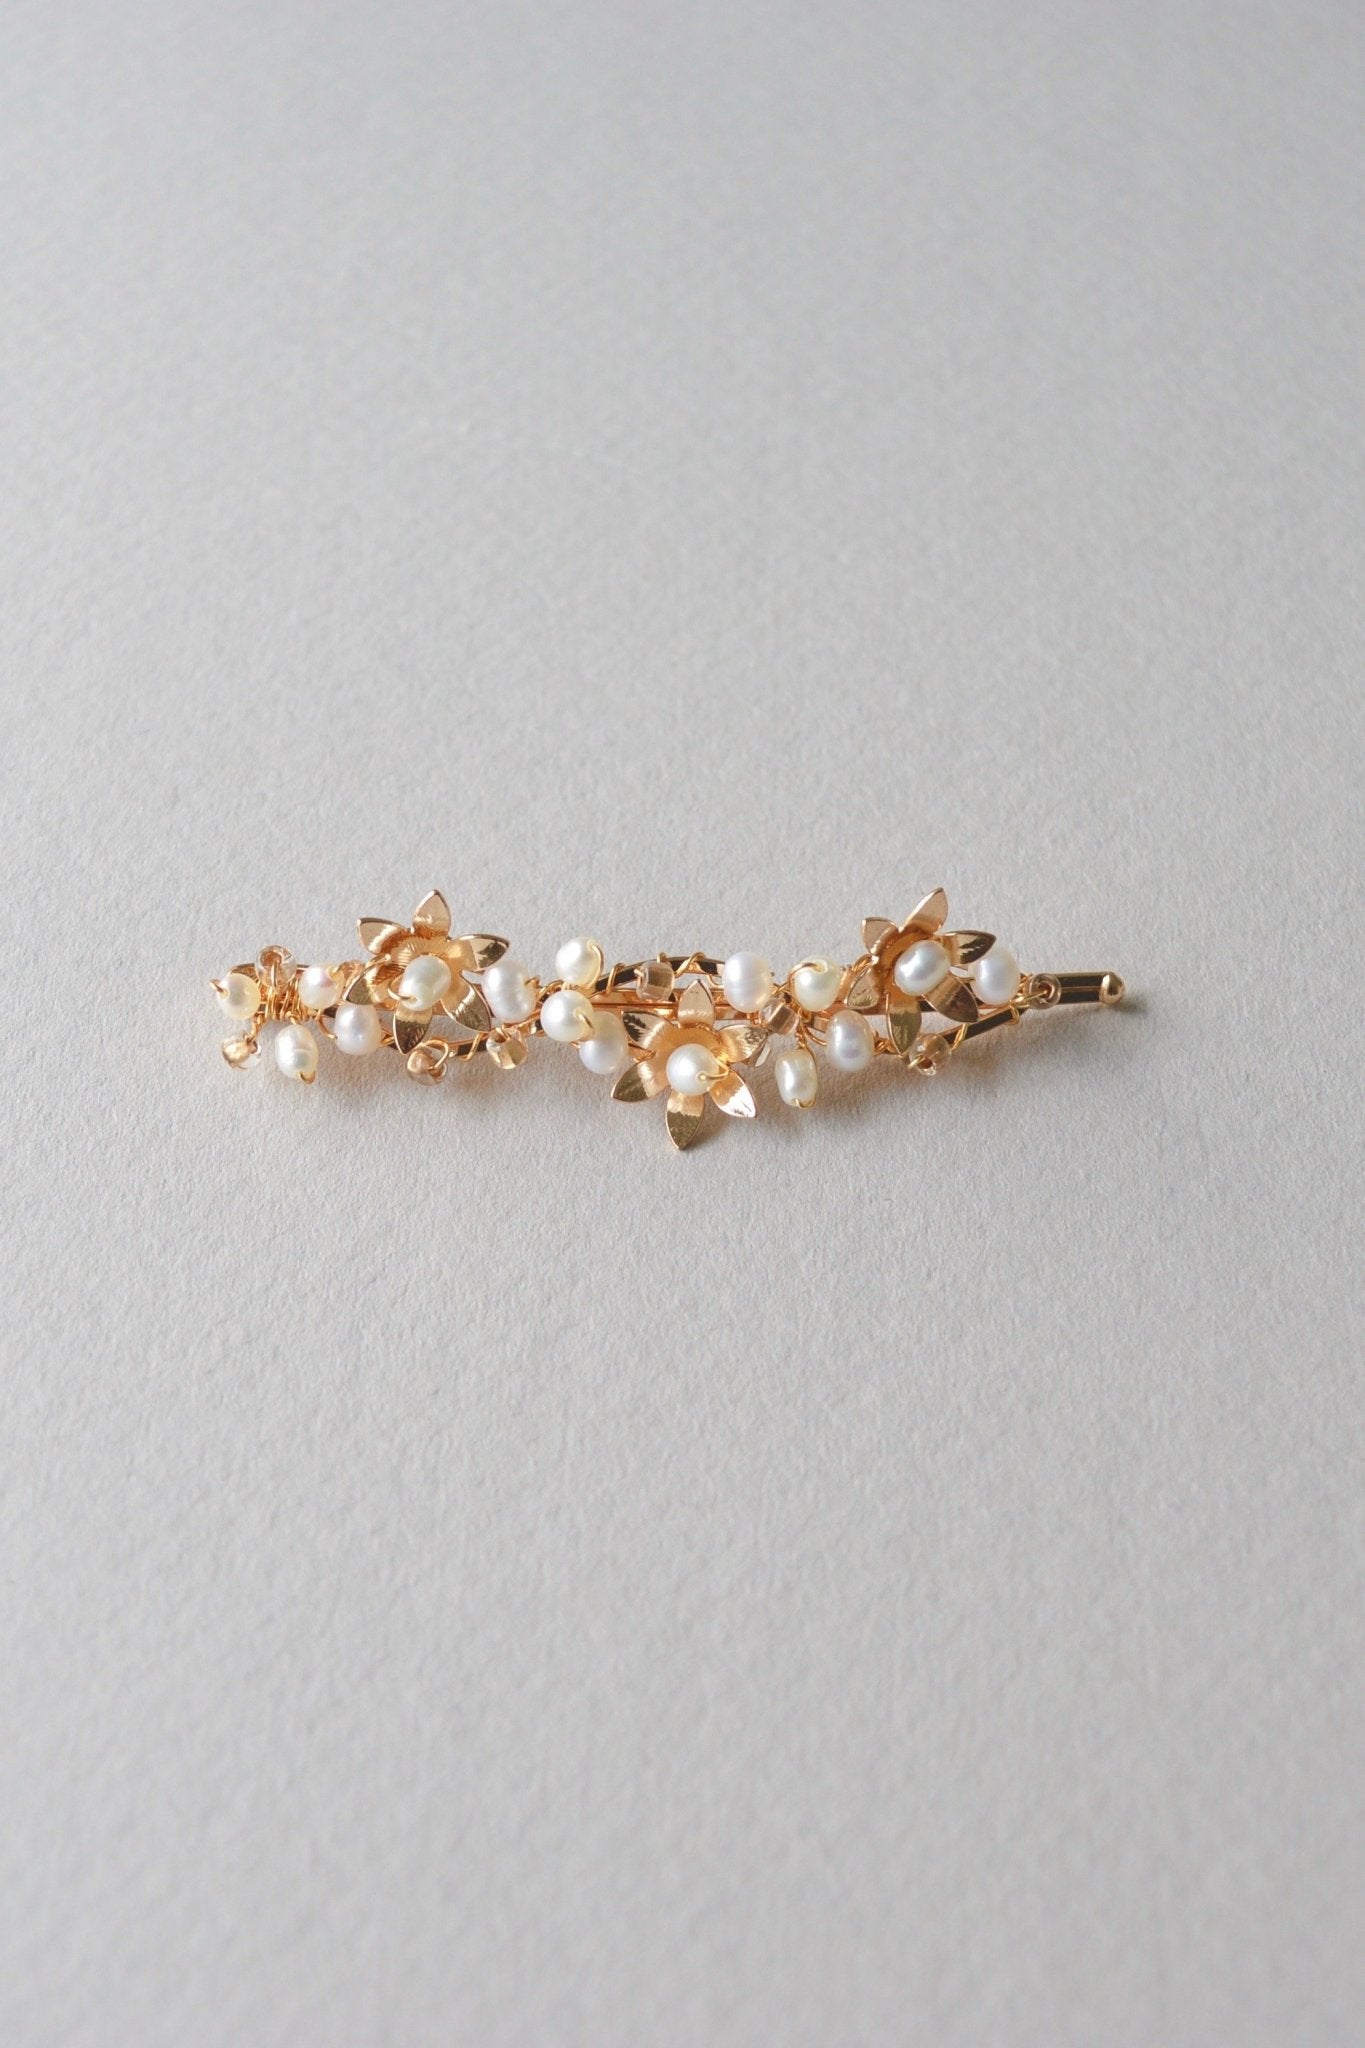 Natural Pearls: Perlen Haarspange Heli | Farbe gold